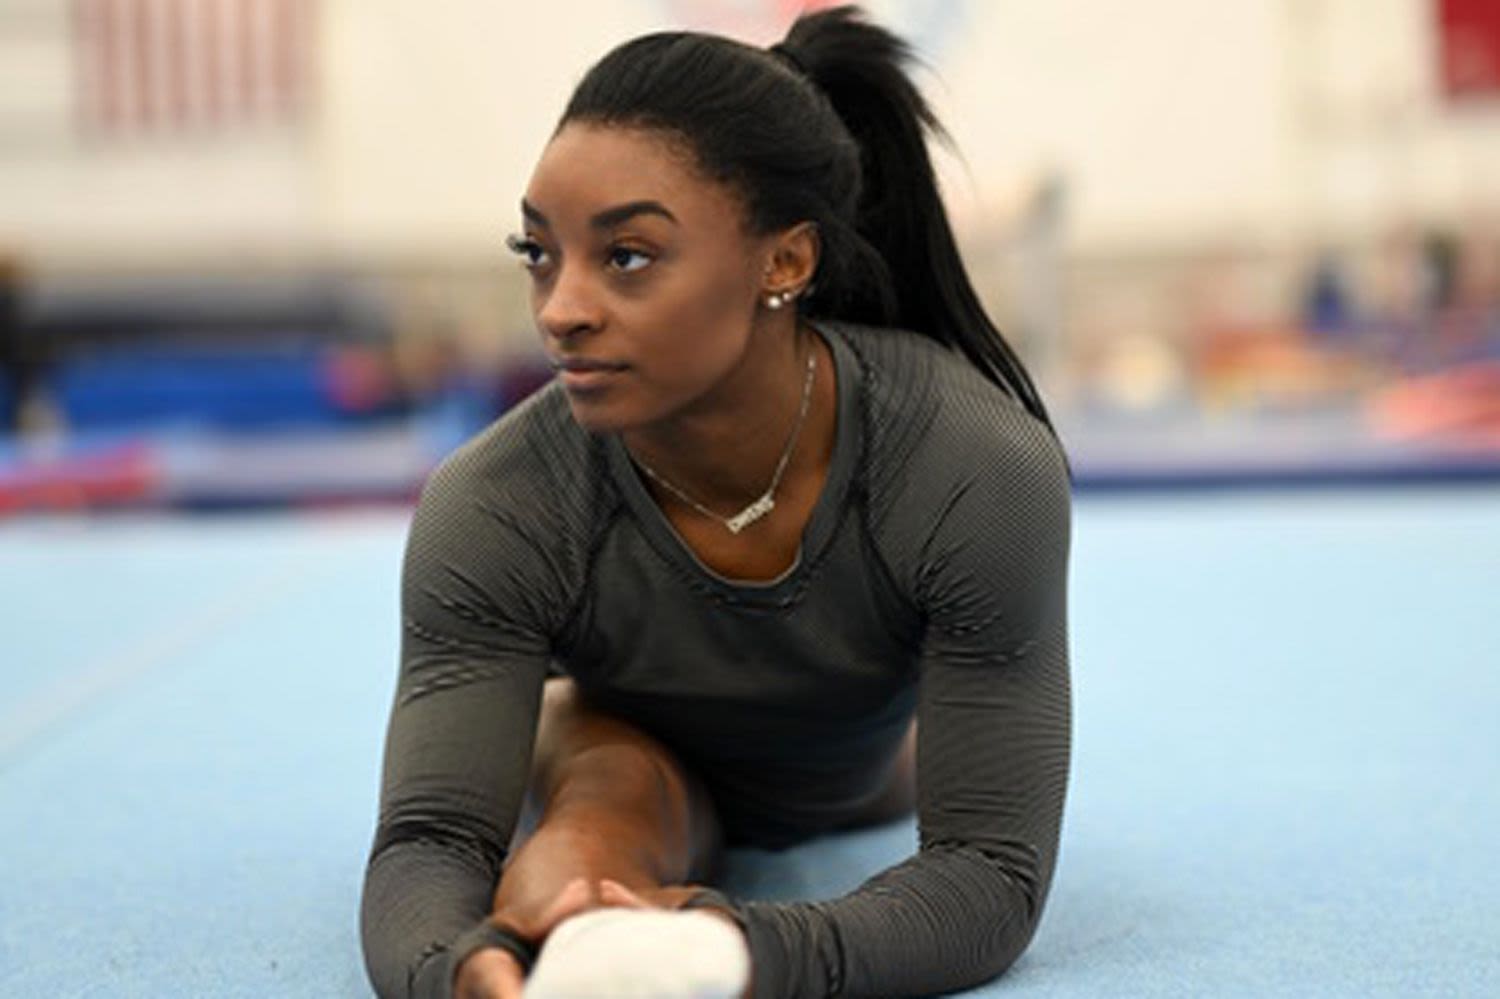 Simone Biles Has 'Unfinished Business' in New Netflix Series Set to Debut Ahead of Paris Olympics